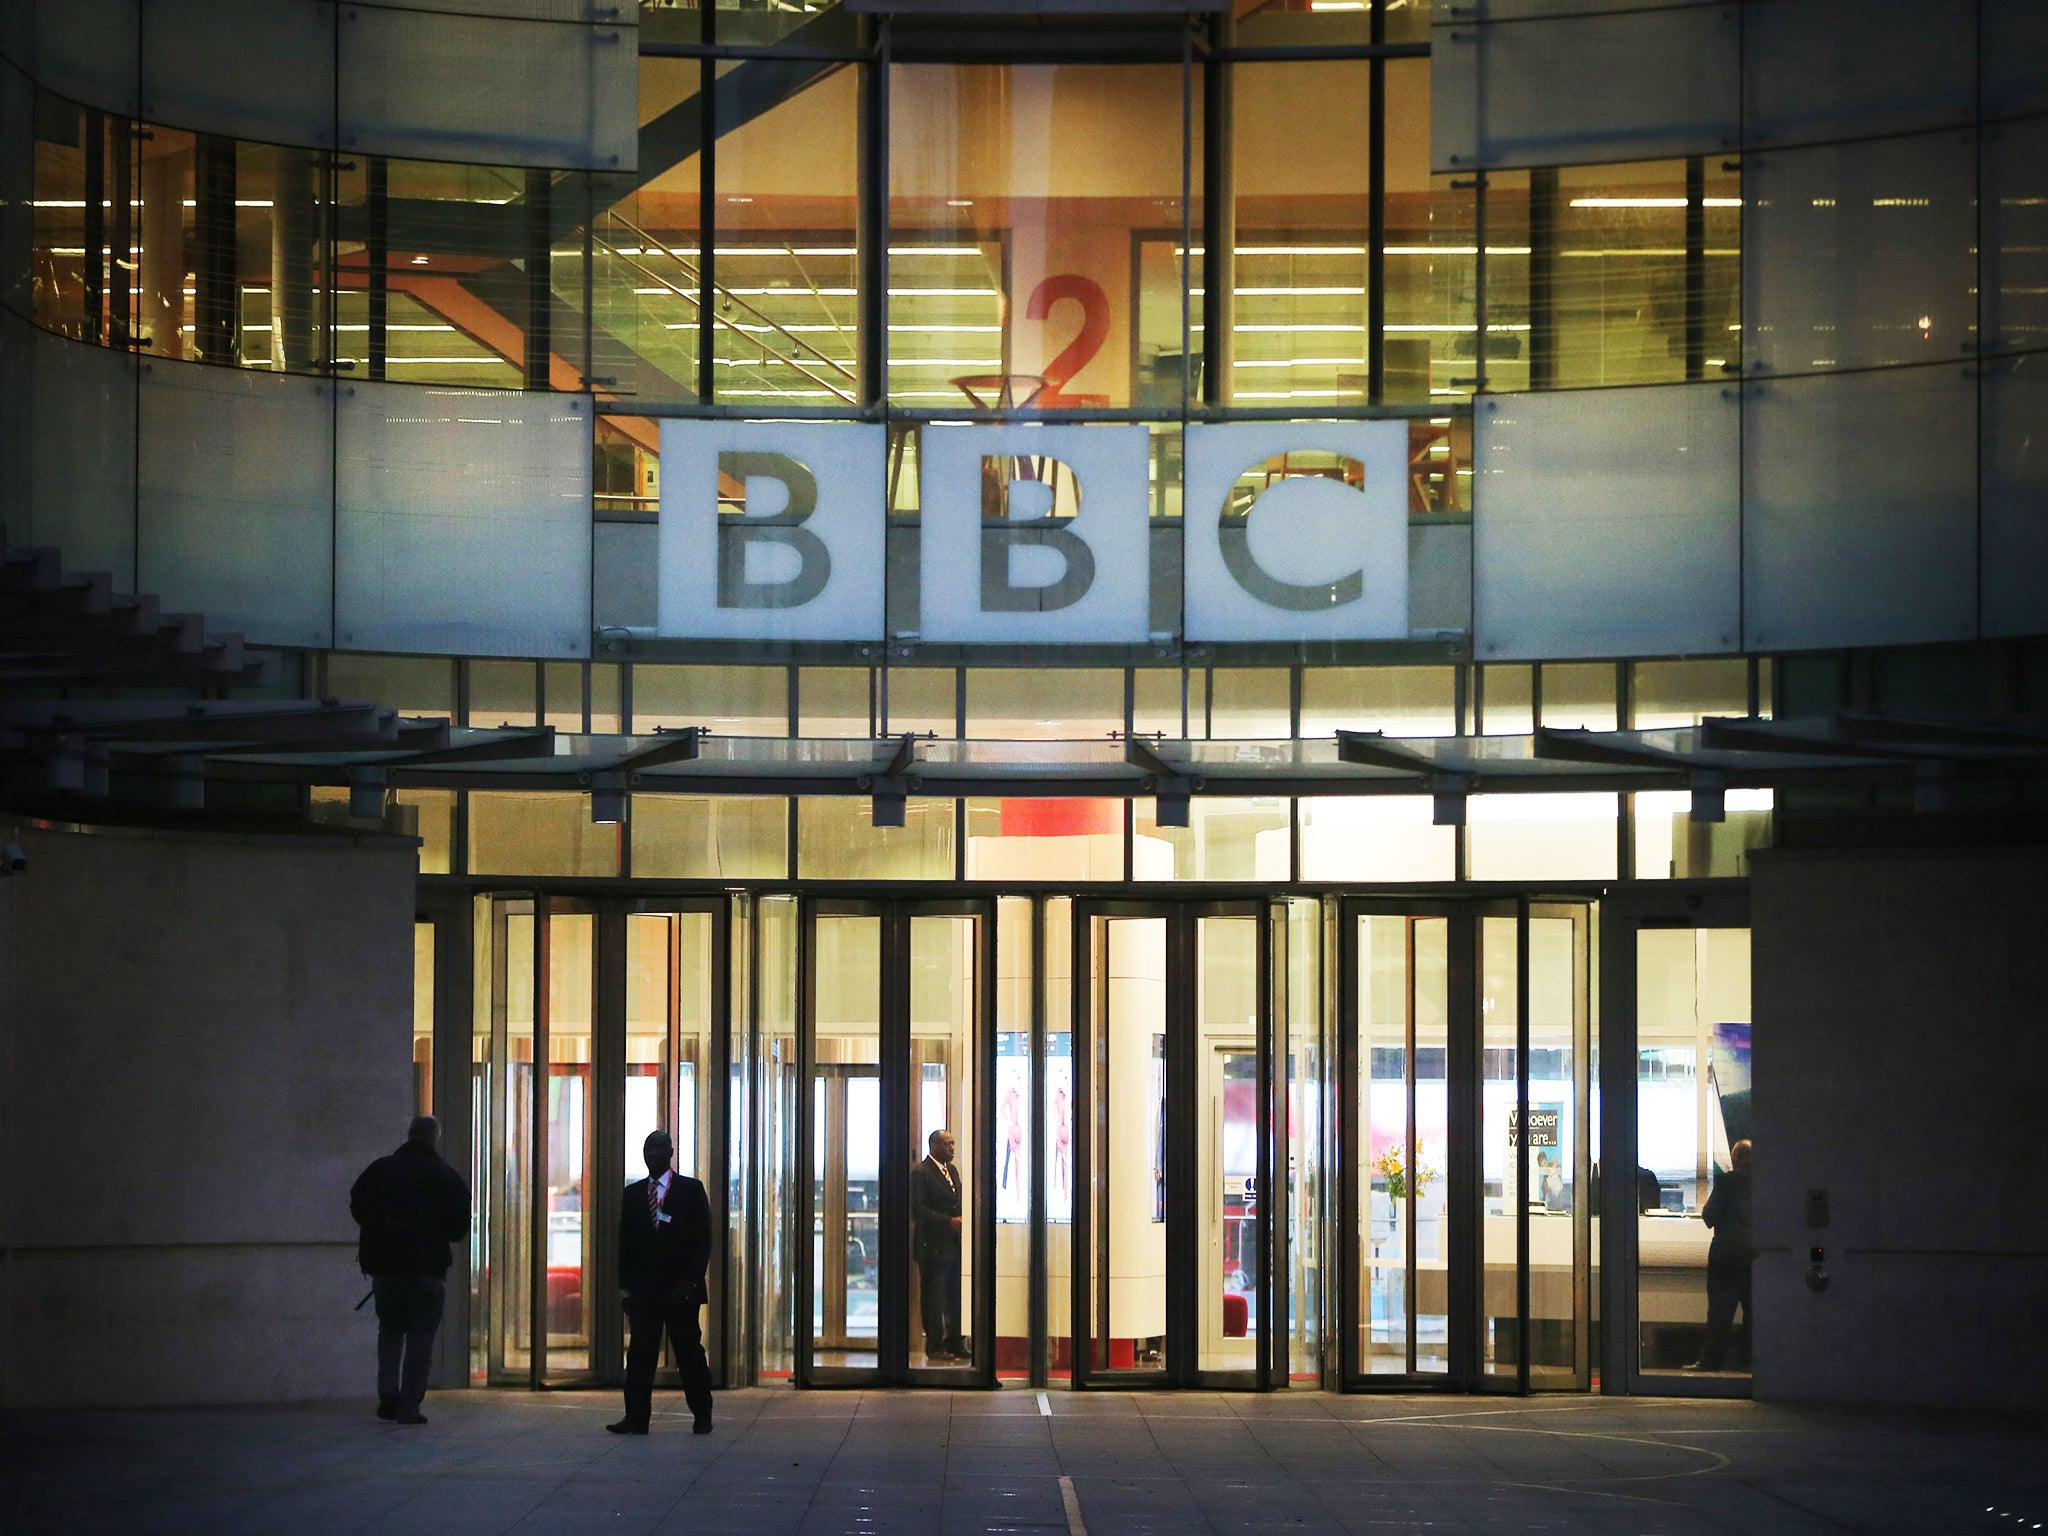 An online petition to save the BBC recipe pages has attracted more than 90,000 supporters